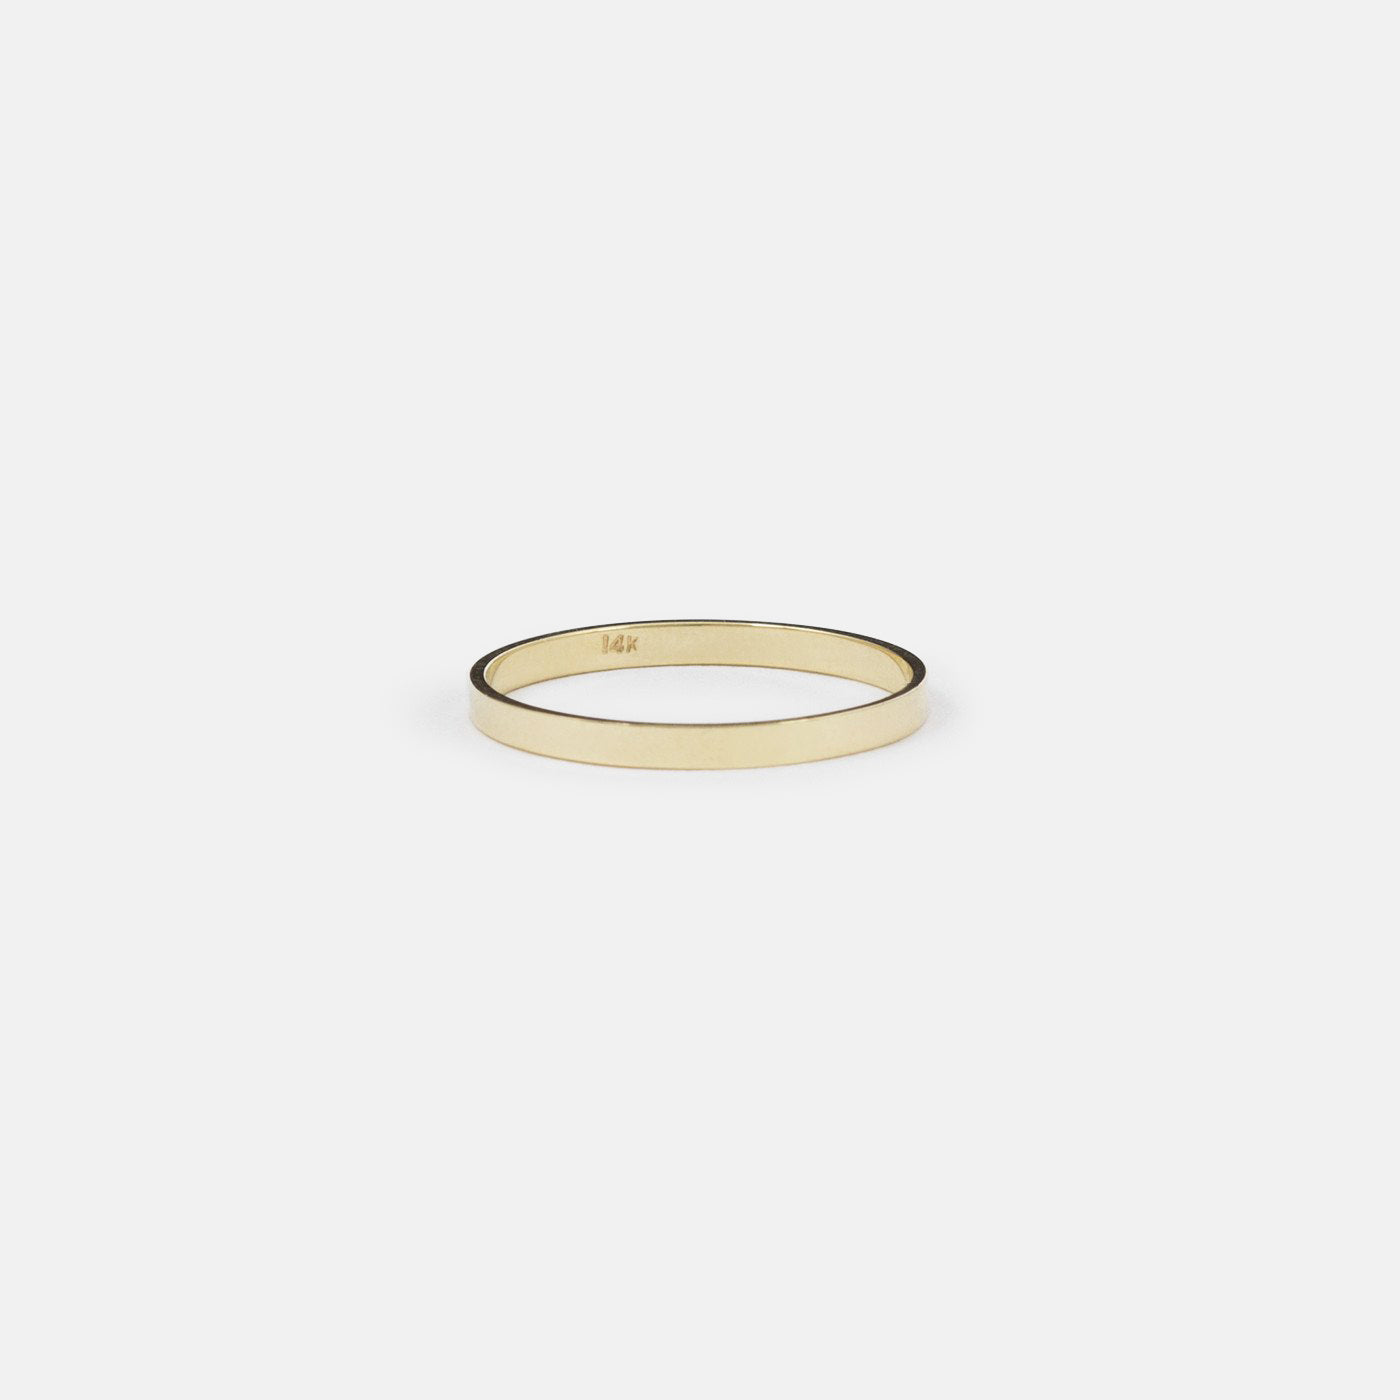 Rini Unisex Ring in 14k Gold By SHW Fine Jewelry NYC